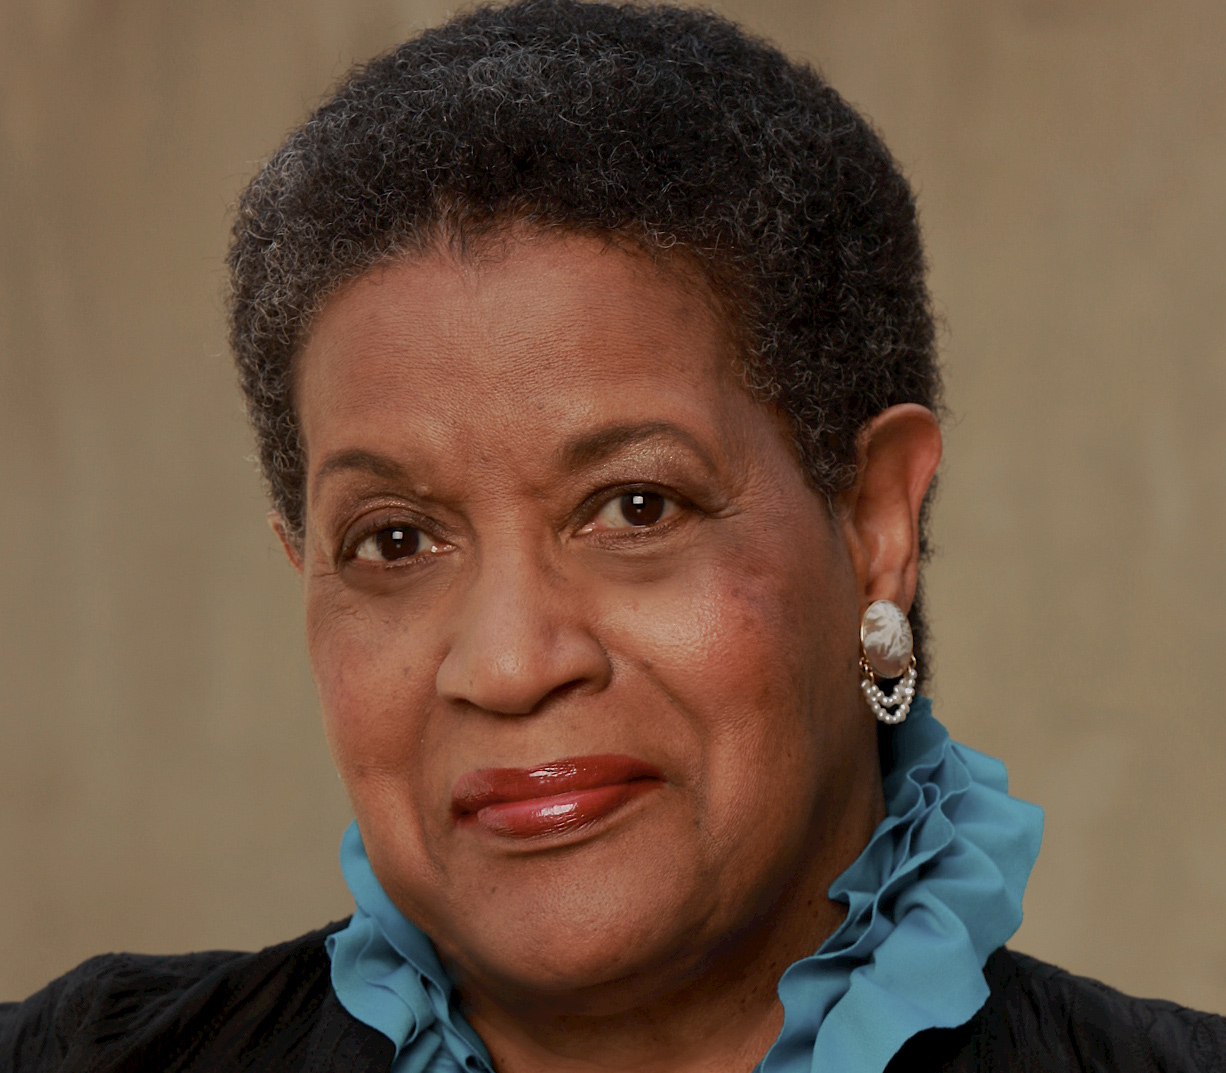 A photo of Myrlie Evers wearing a blue ruffled collared shirt.